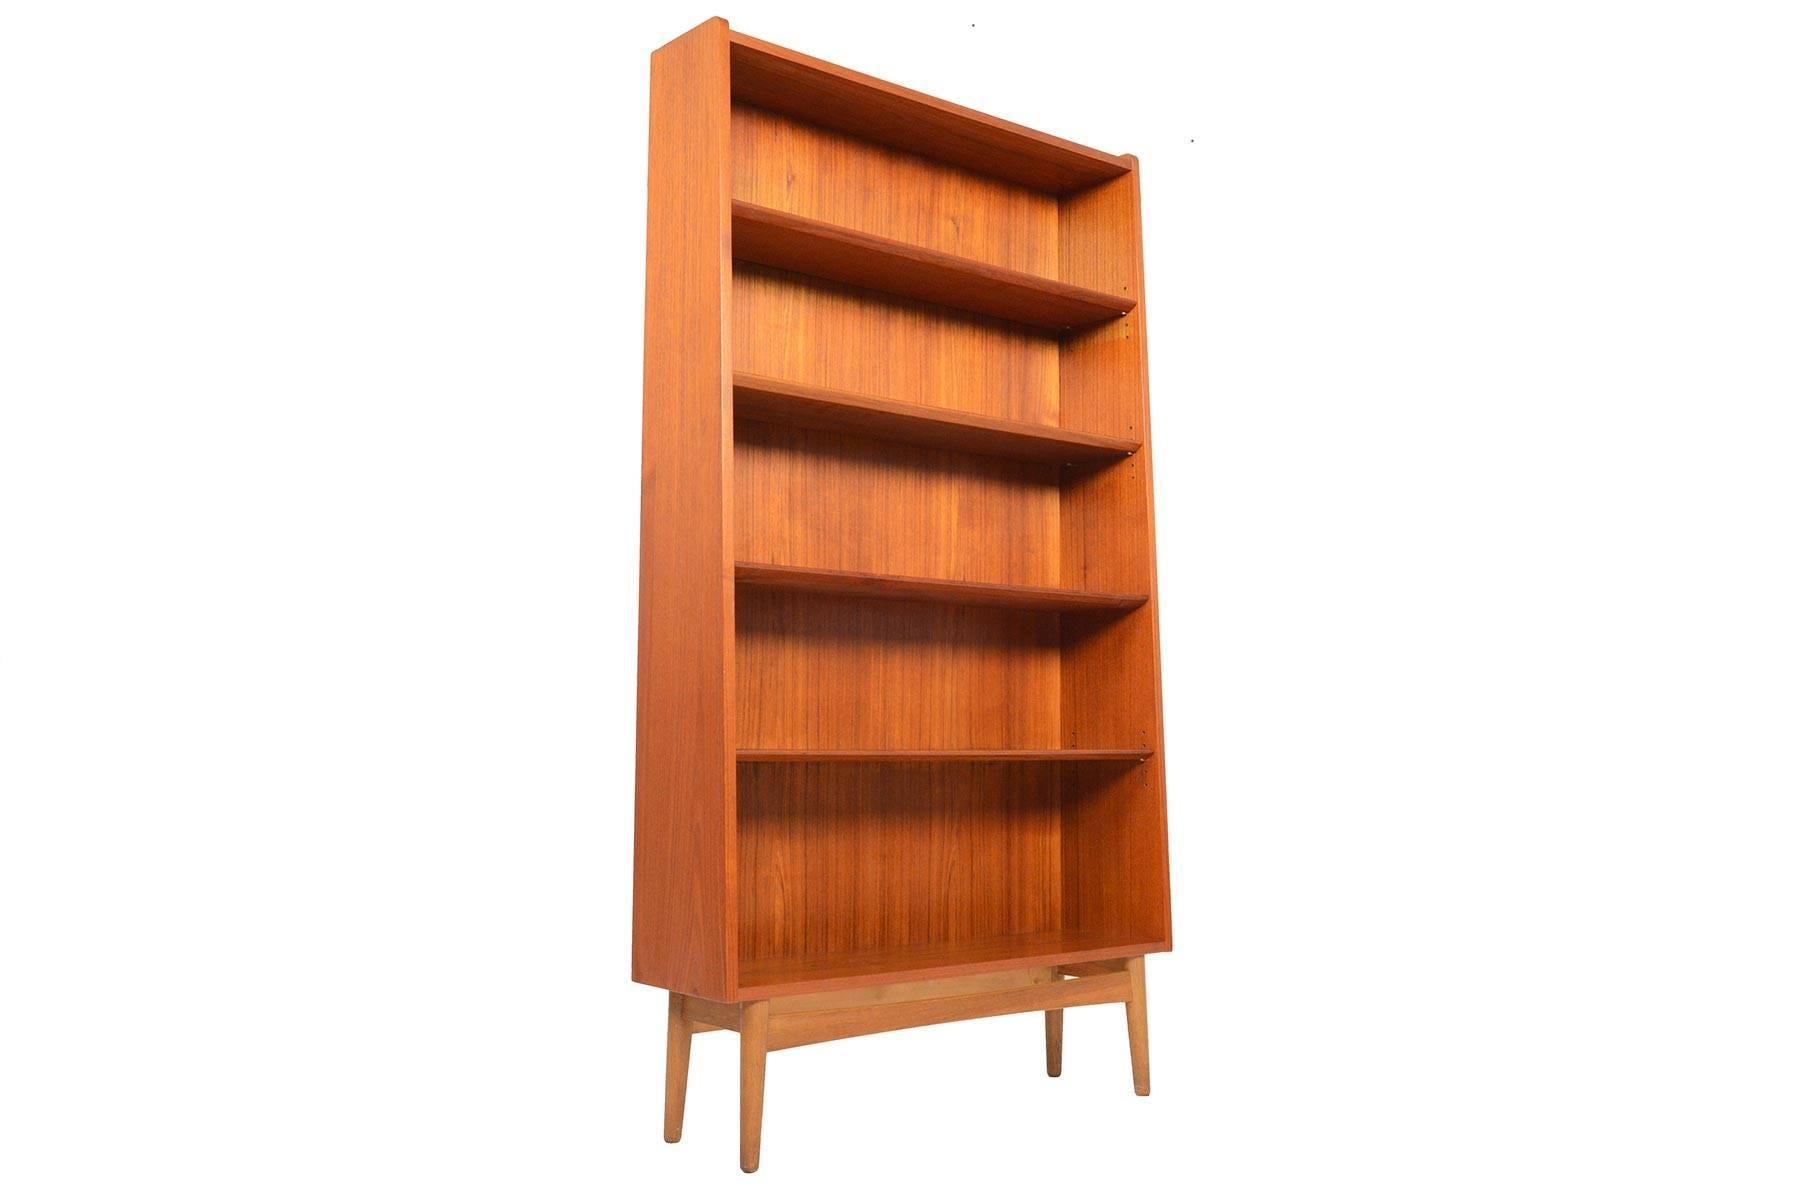 This stately Danish modern midcentury bookcase in teak by Bornholms is the perfect storage piece for any modern home. Four adjustable shelves provide versatility for storage. Case stands on a beautiful oak base. In excellent original condition with